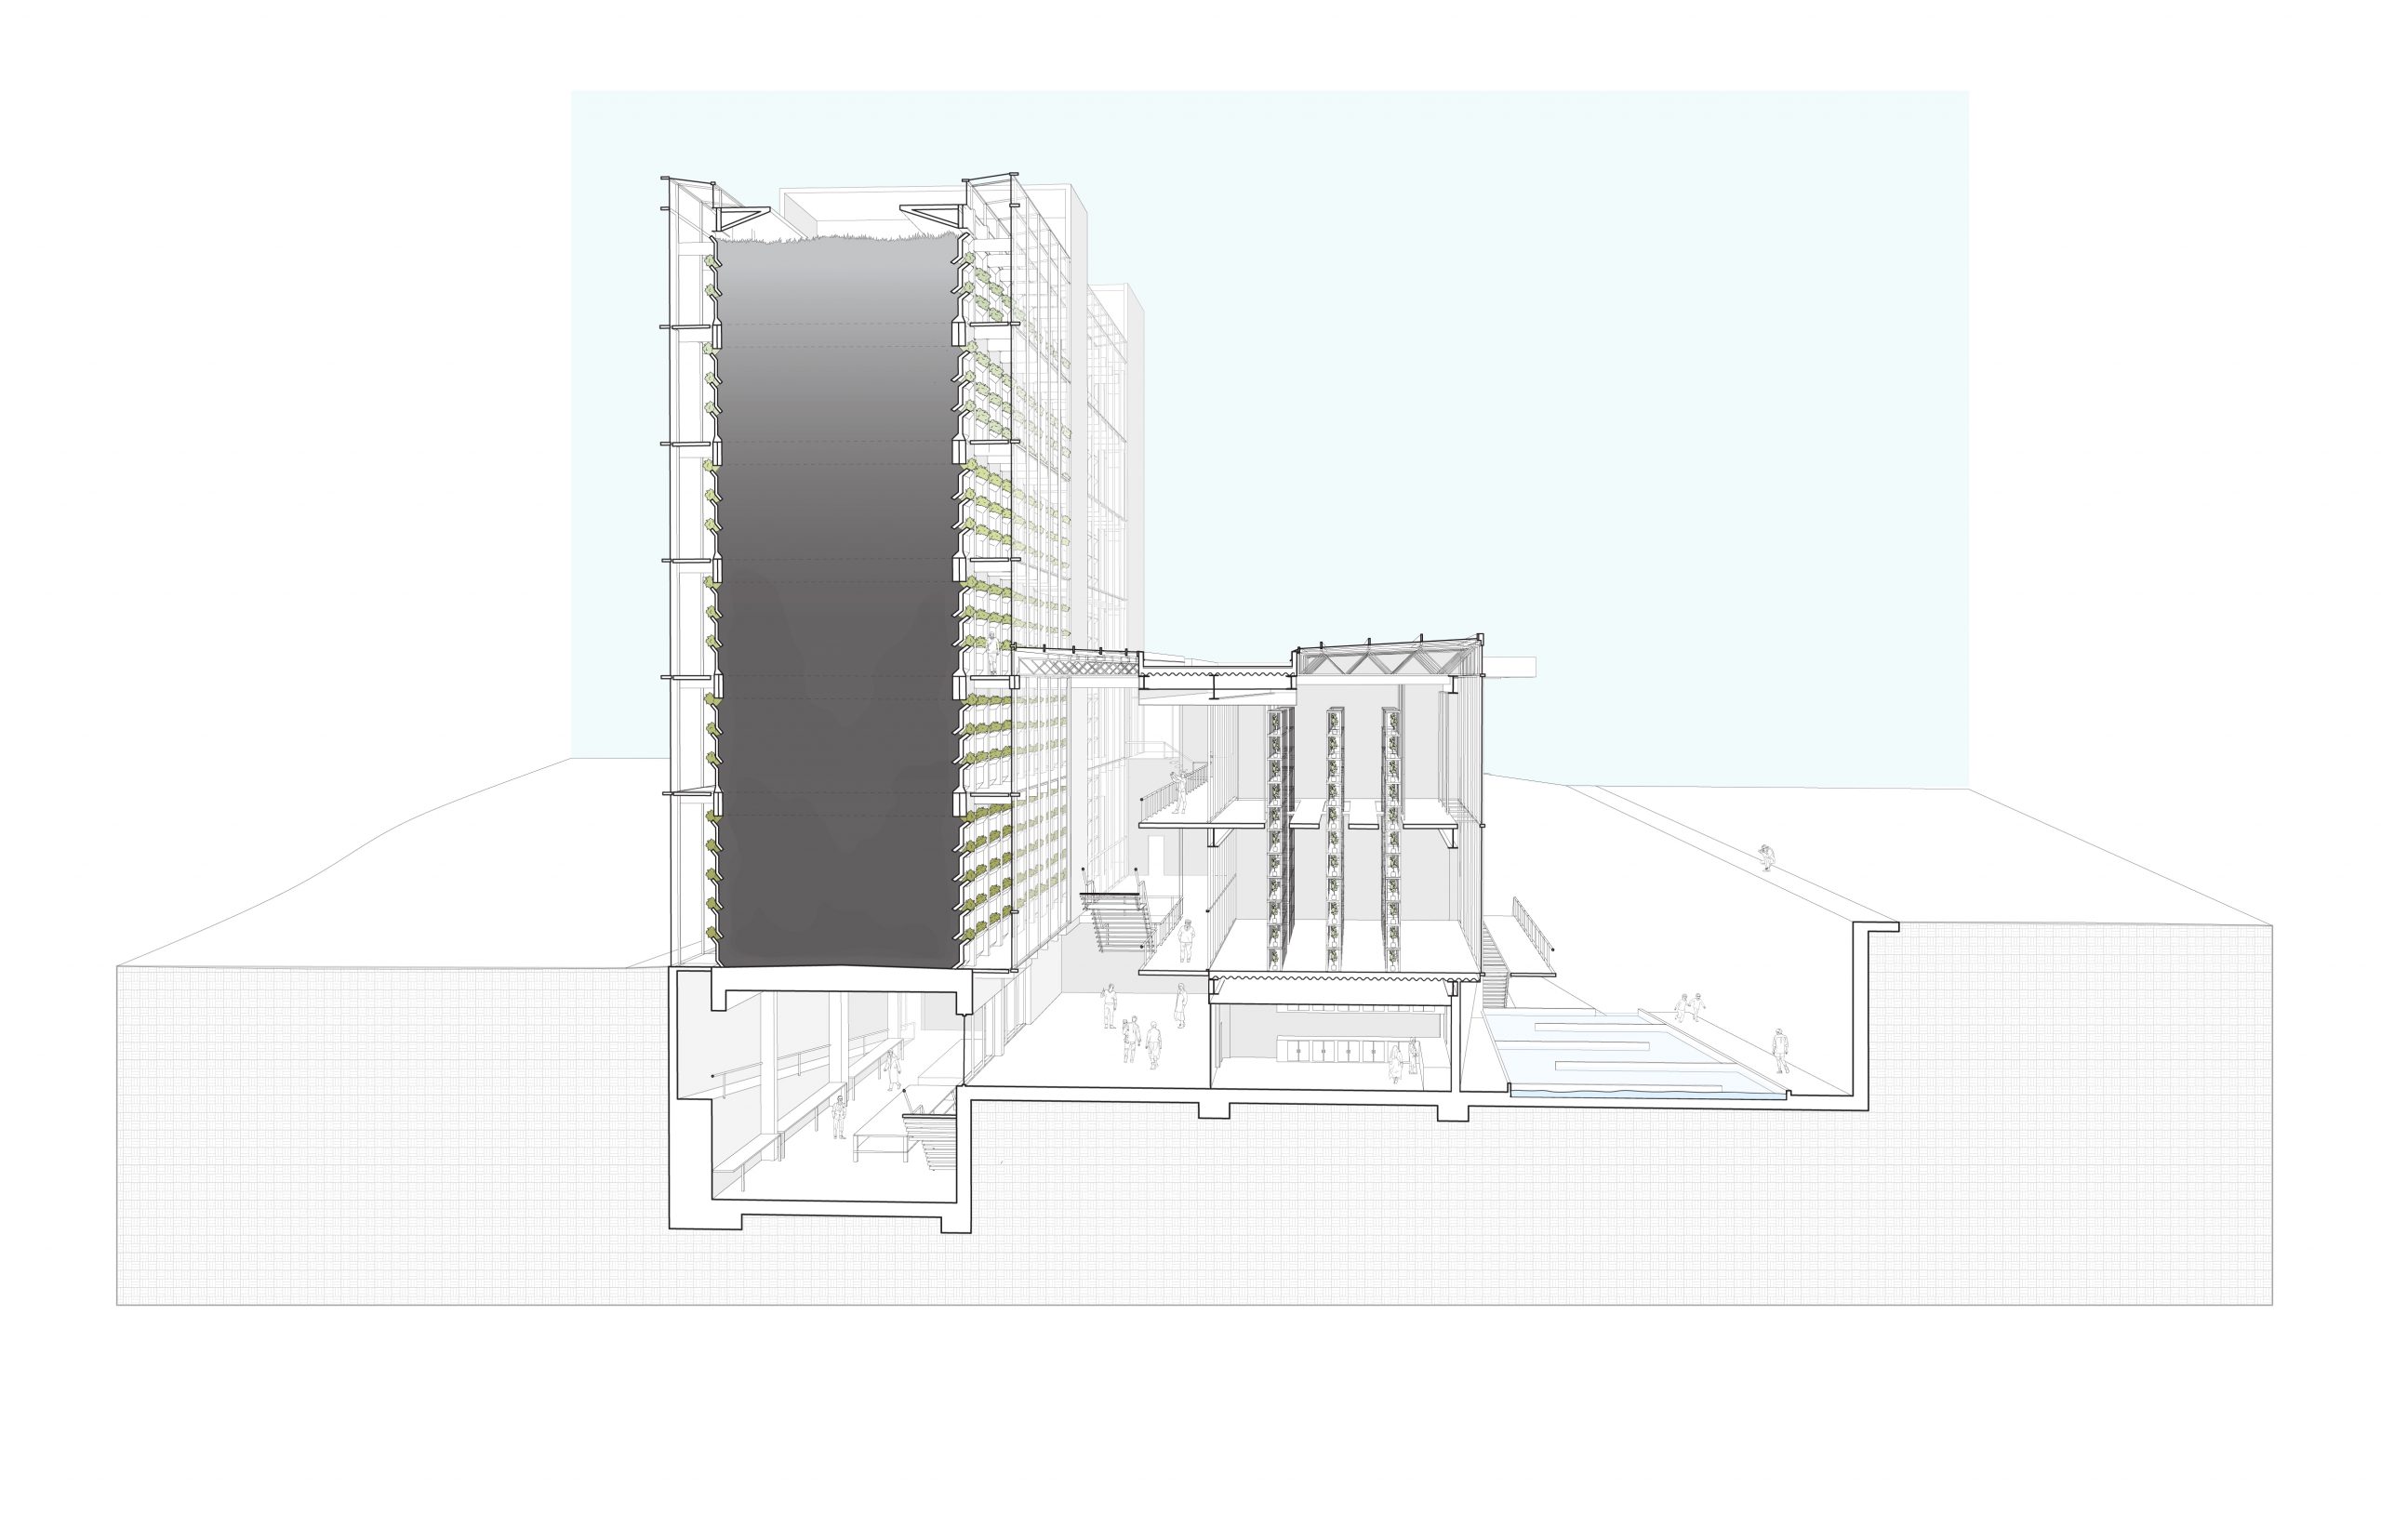 Technical architectural cross-section drawing of a multi-story building with detailed interior layers and elevation context.